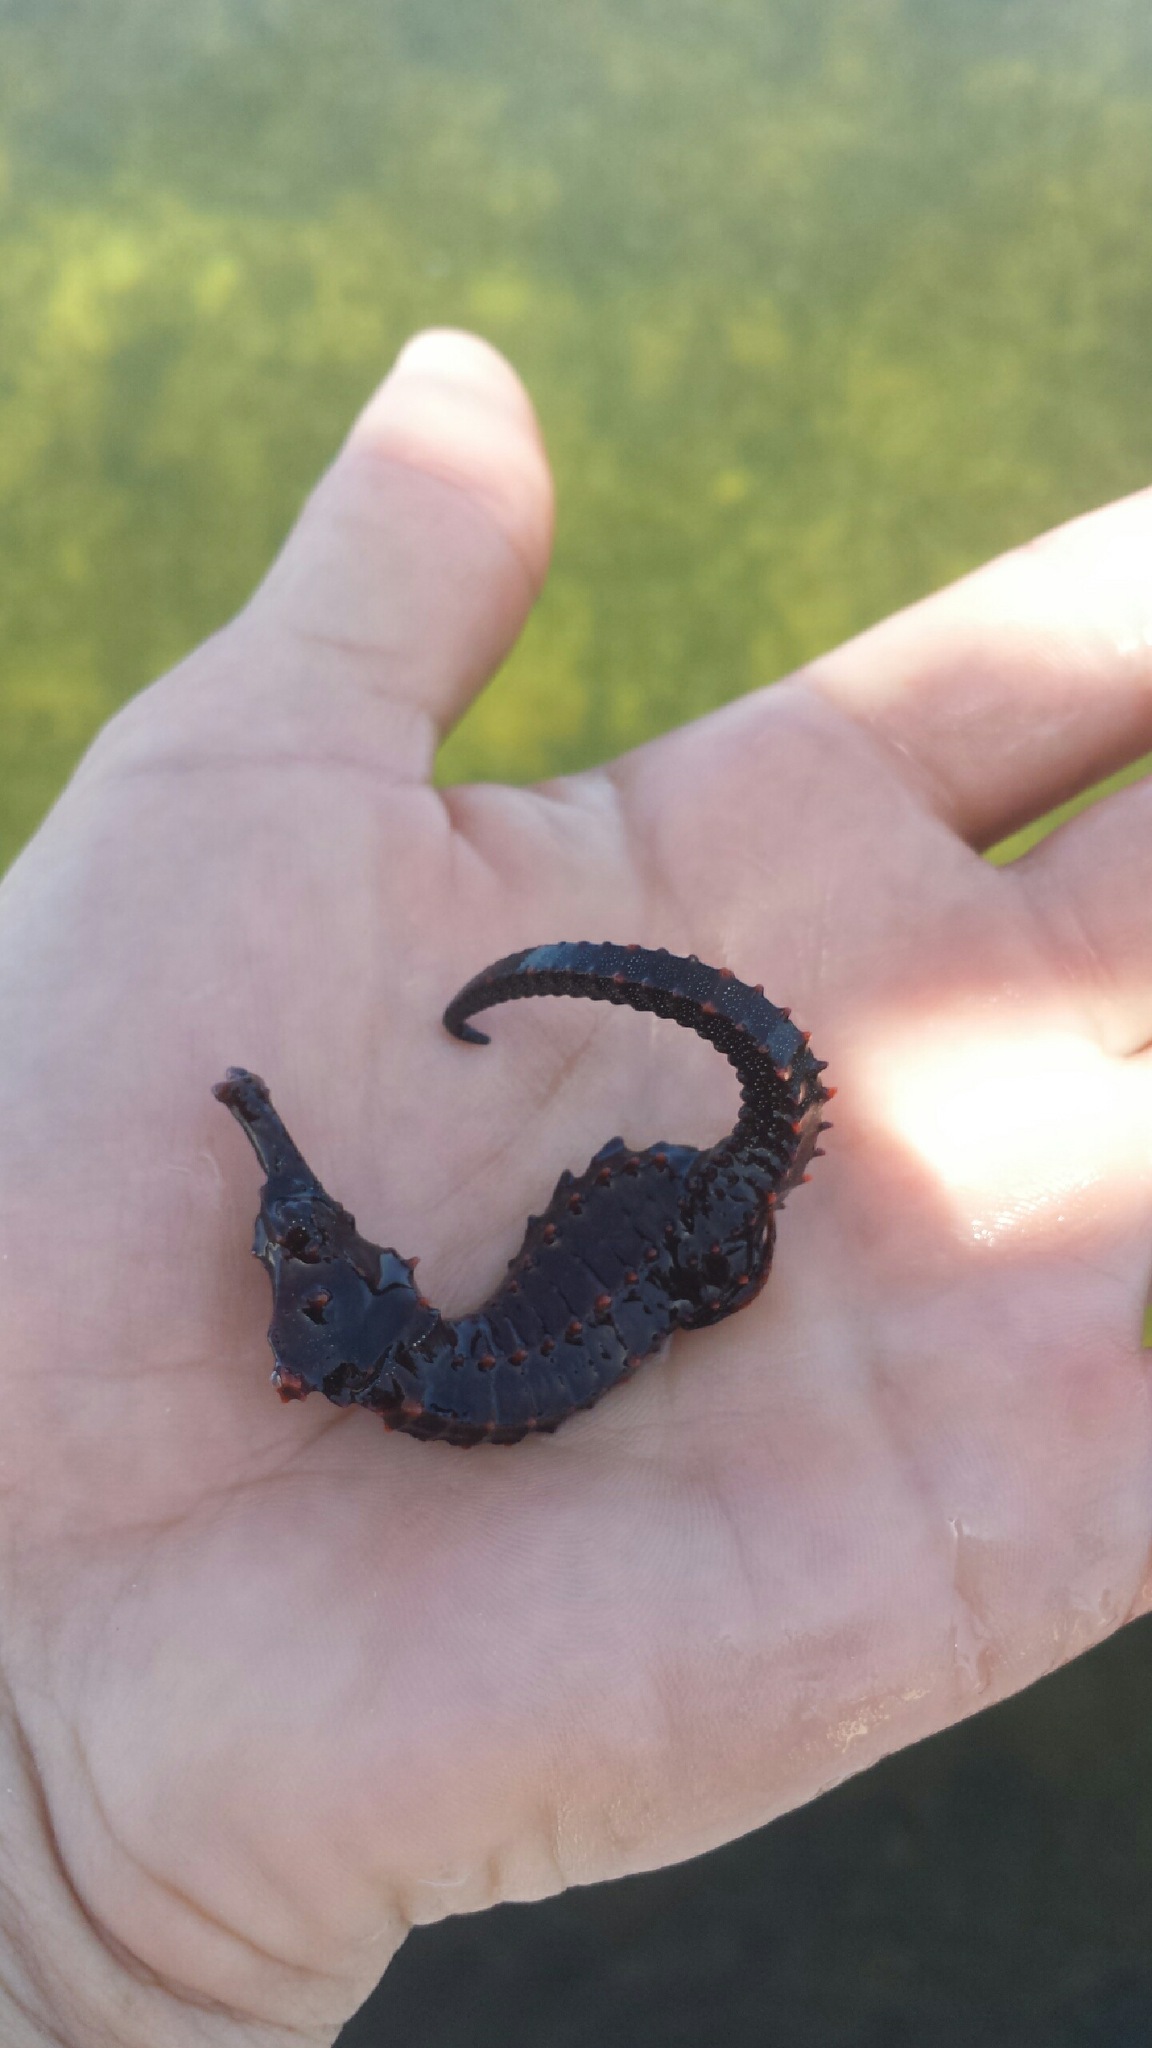 A seahorse is found in one of the trawls. Image credit: NOAA